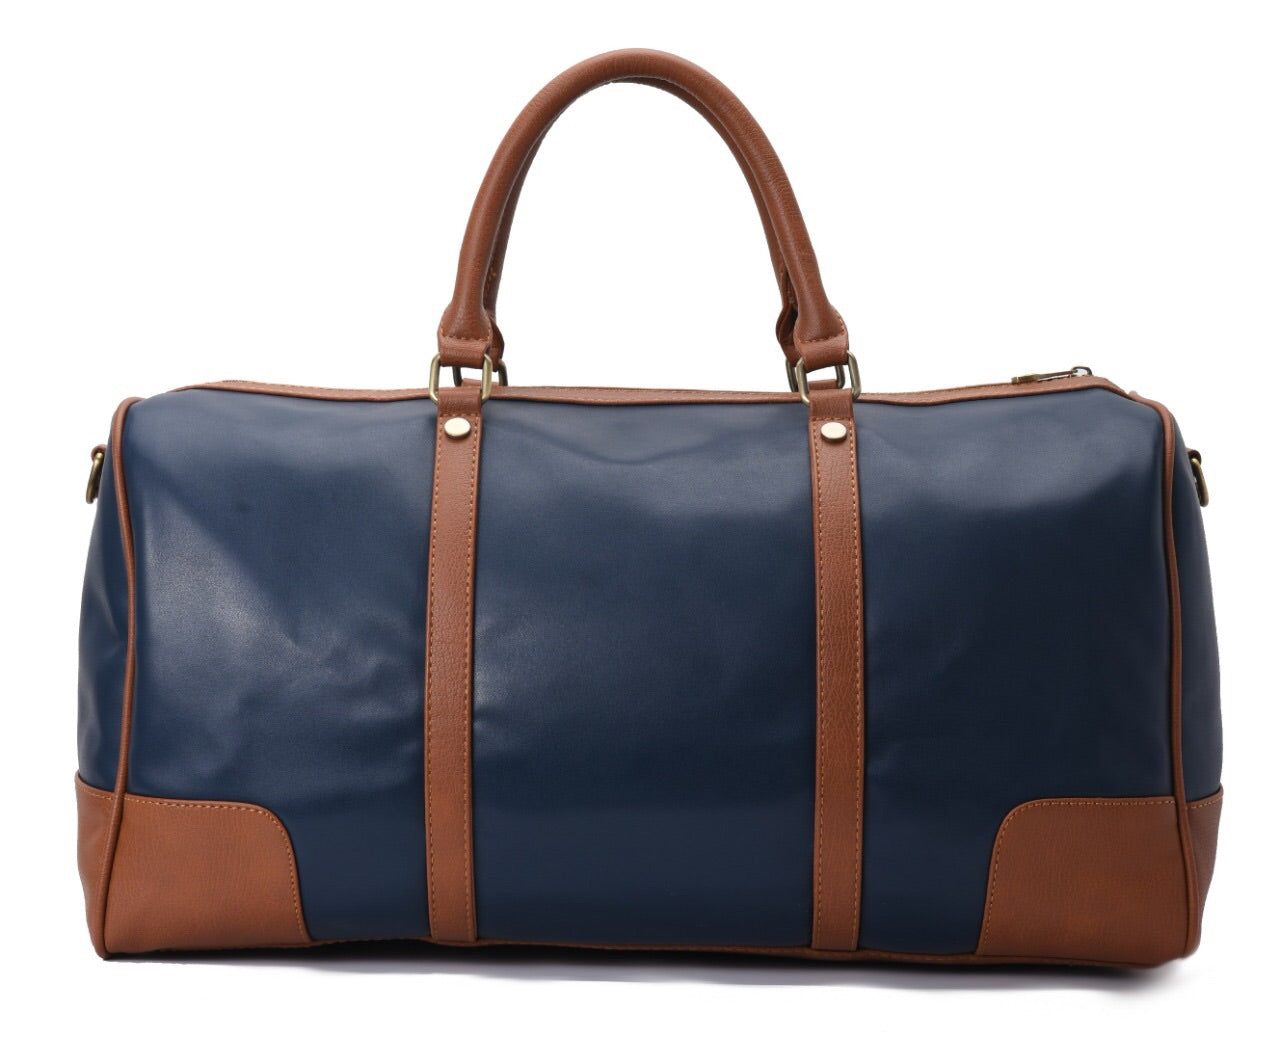 Duffle Bag Leather Navy and Brown